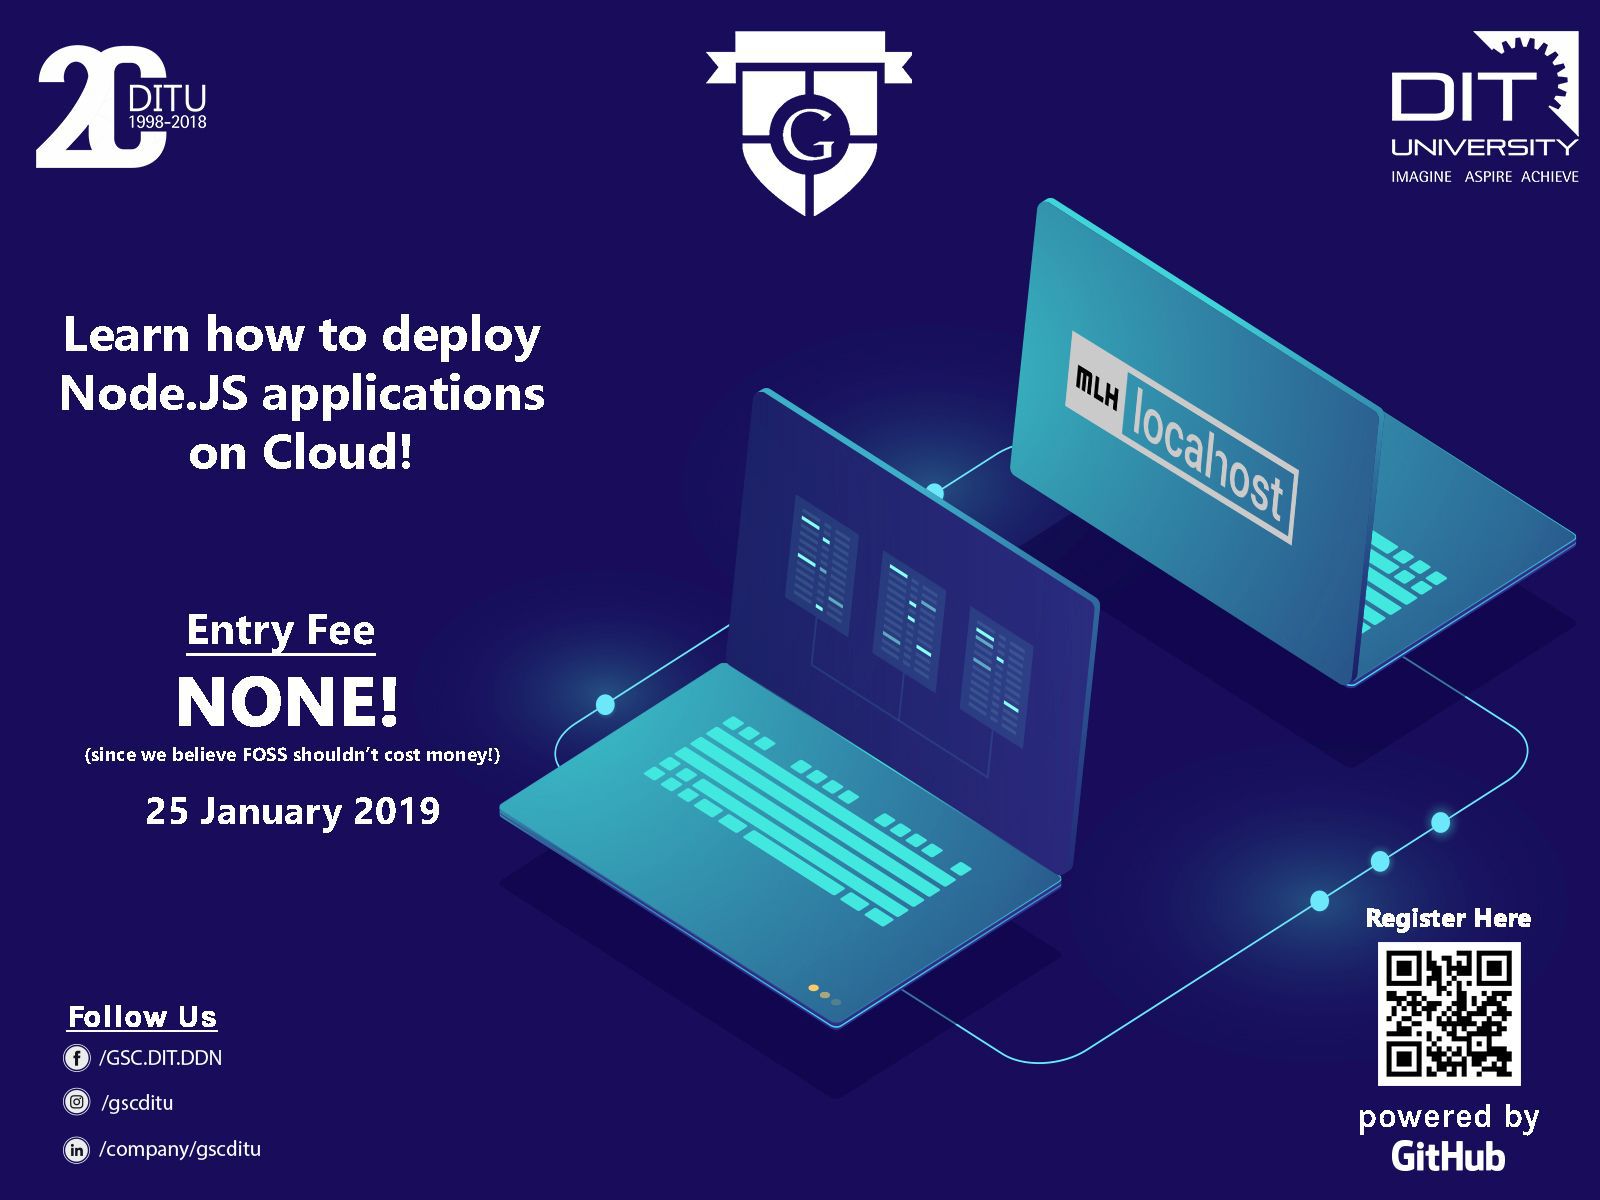 Workshop on 'Learn how to deploy Node.JS Applications on Cloud'